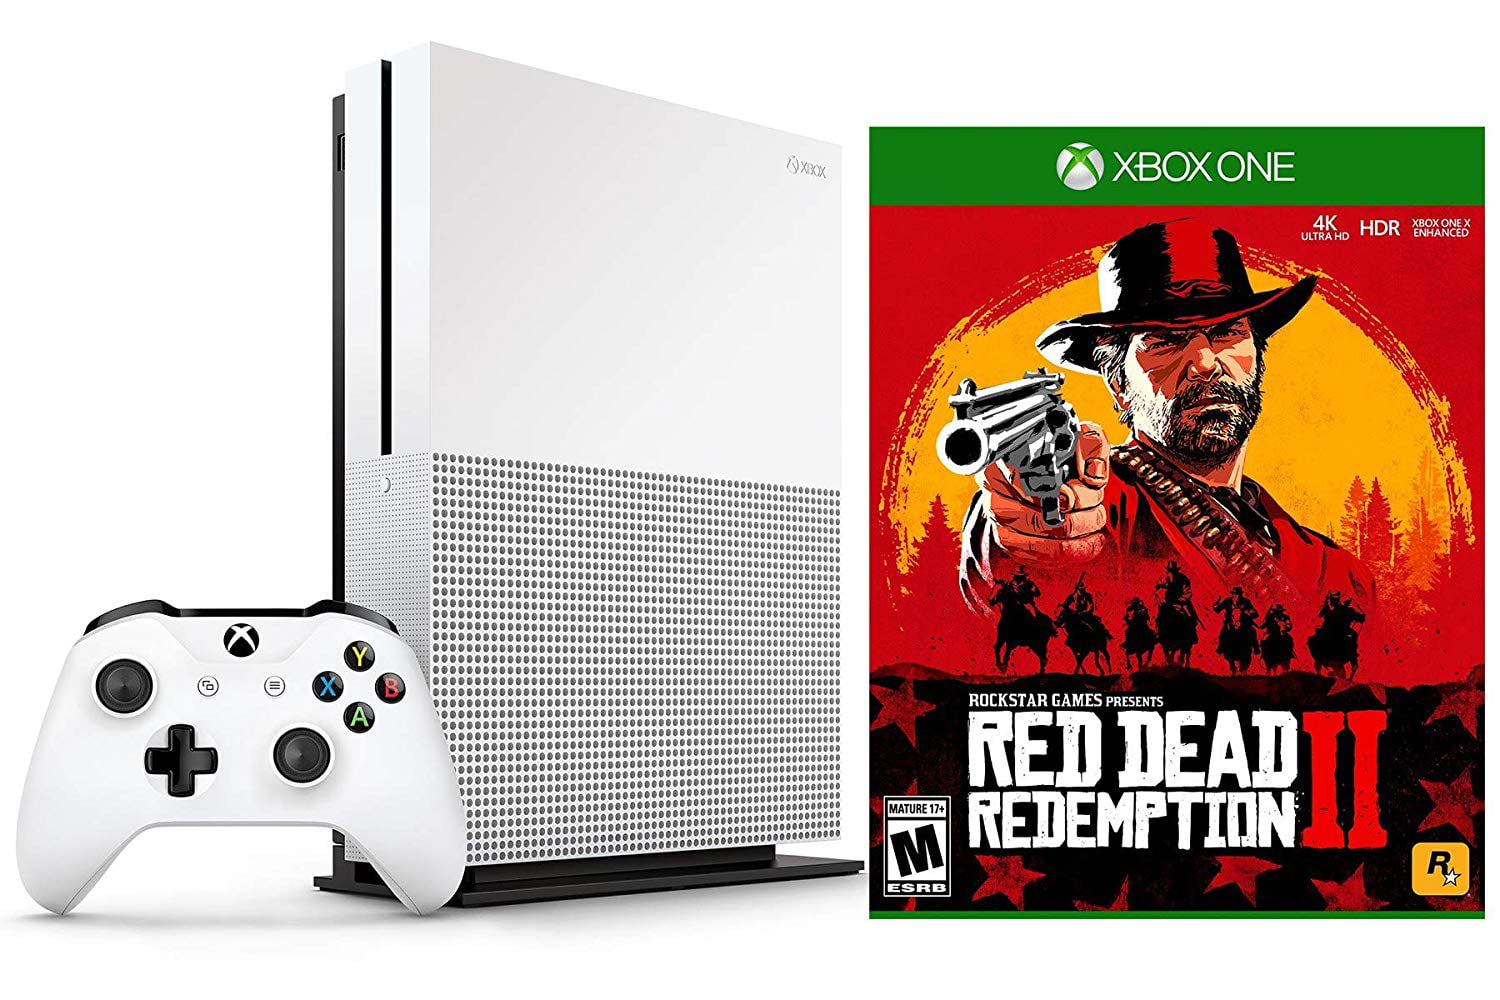 Tenslotte Ansichtkaart Intiem Microsoft Xbox One S Red Dead Redemption 2 Bundle: Xbox One S 1TB 4K  Entertainment Console with Red Dead Redemption 2 - Walmart.com